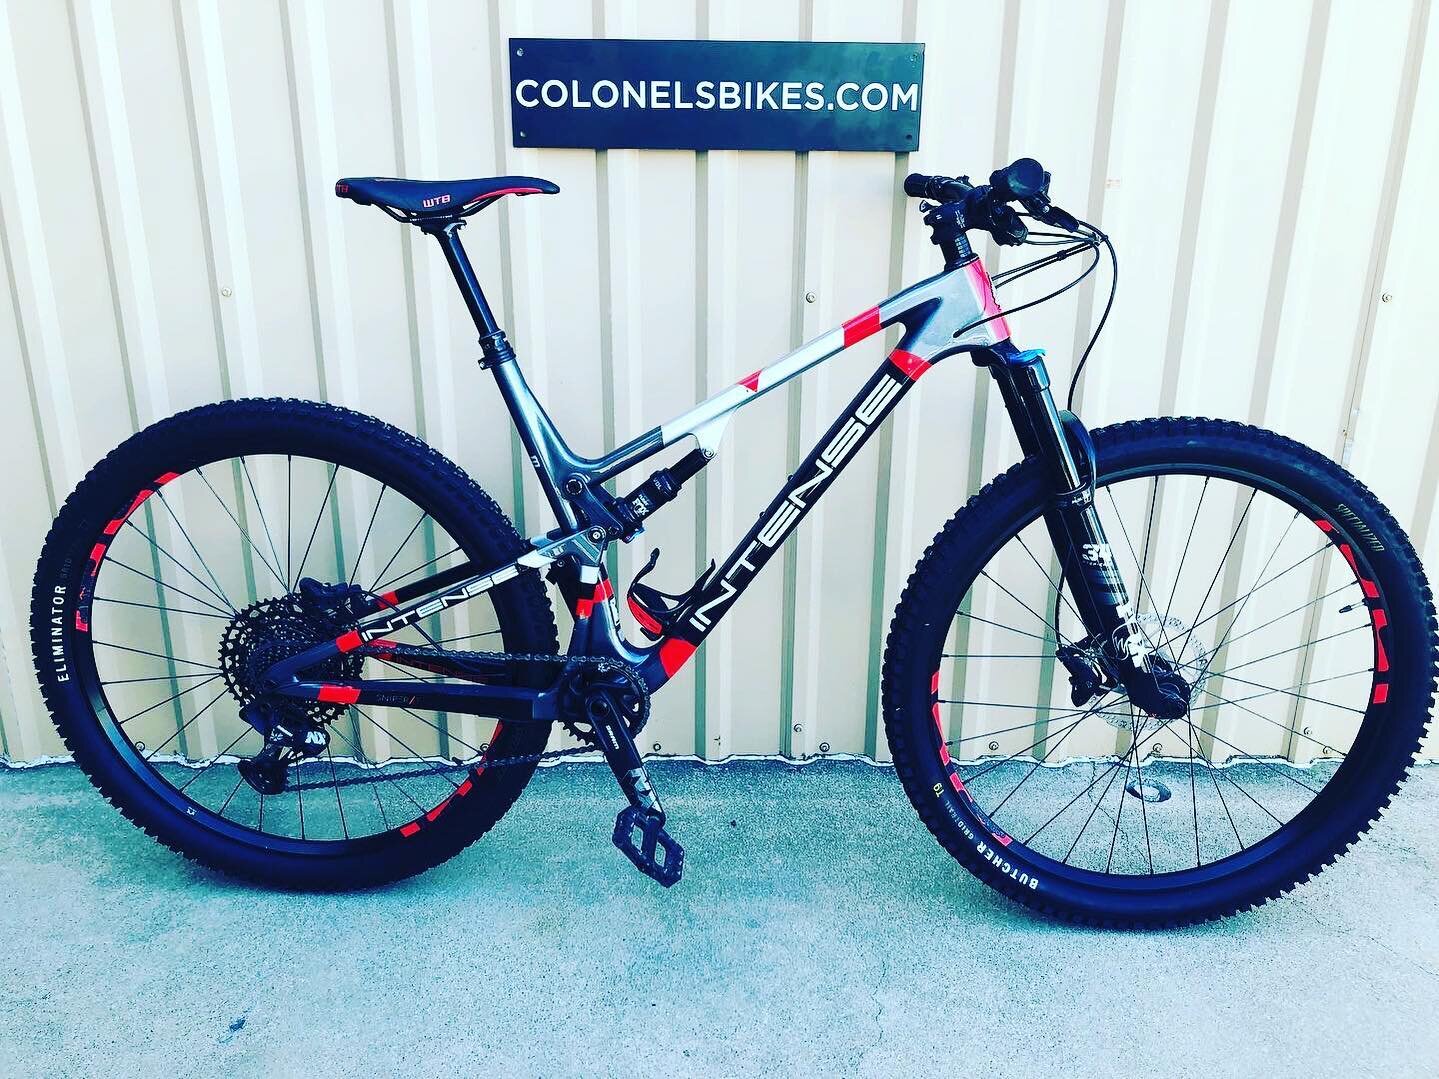 PRICE DROP! Now only $2200.00. Originally $4000.00. Excellent condition pre-owned Intense Spider T expert. Size large. All carbon frame.SRAM NX components. Fox 34 Stepcast fork. Raceface dropper post with Wolf Tooth lever. Specialized Eliminator rear